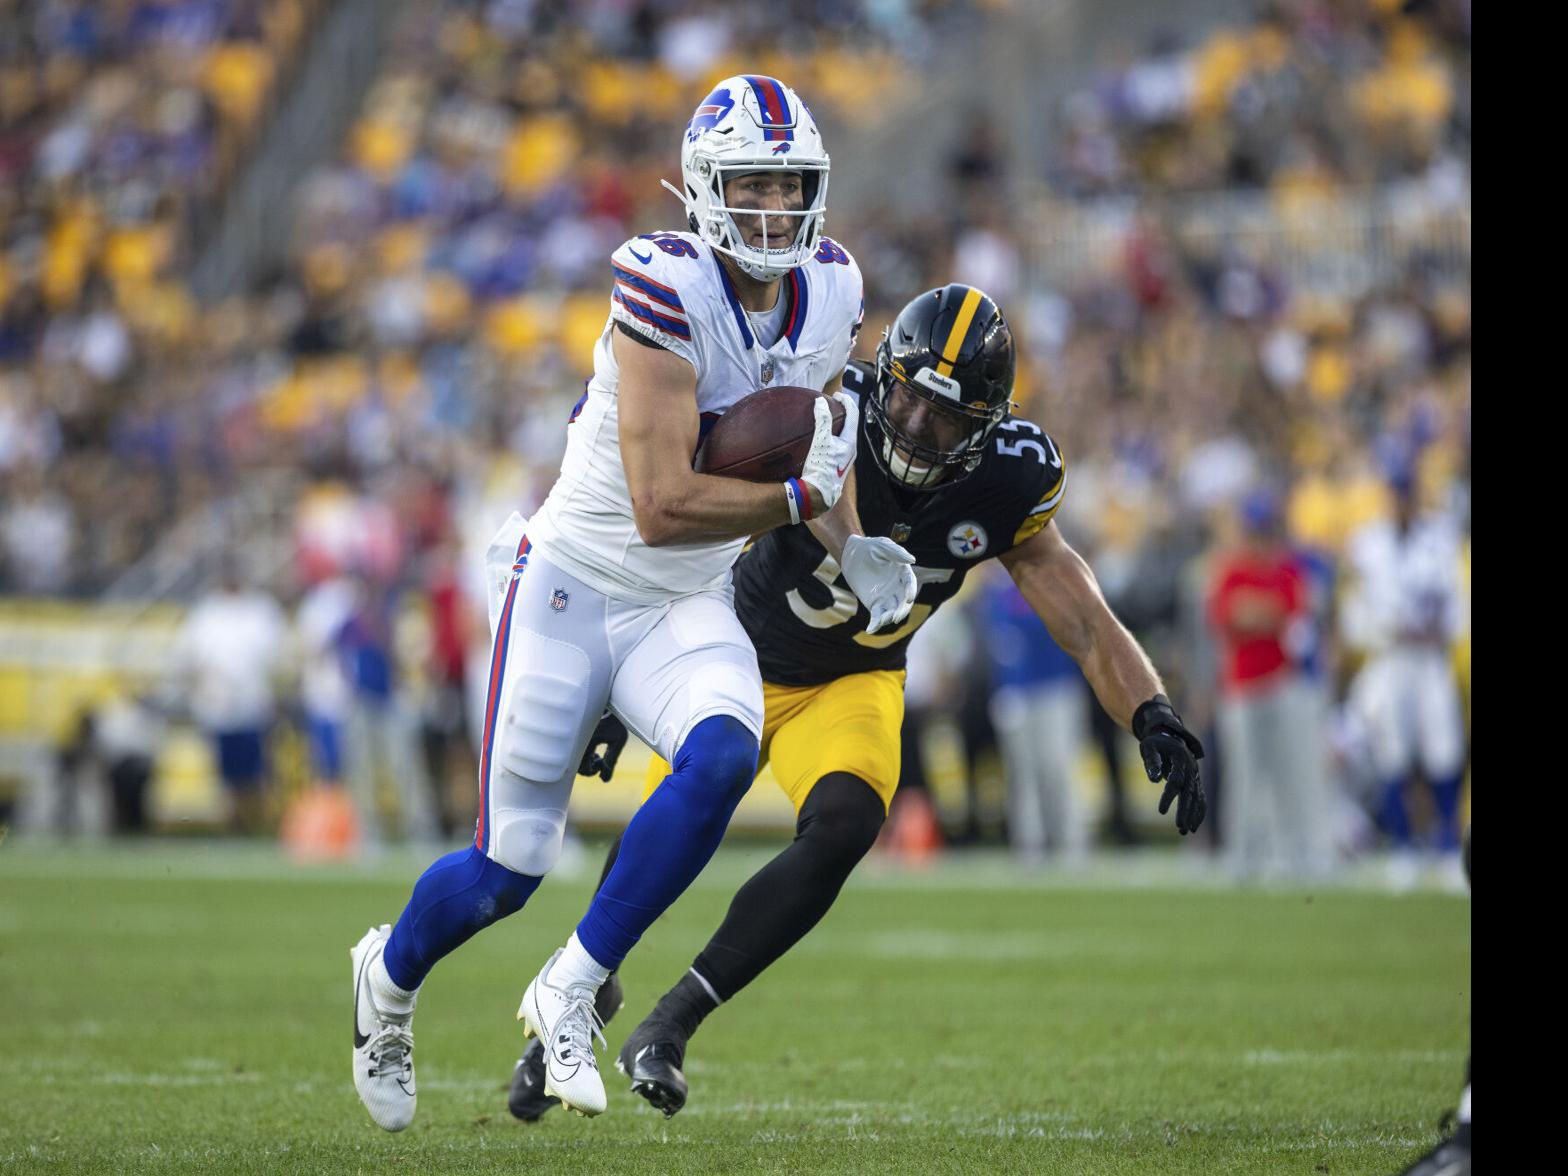 Steelers defense shuts out Bills starting offense